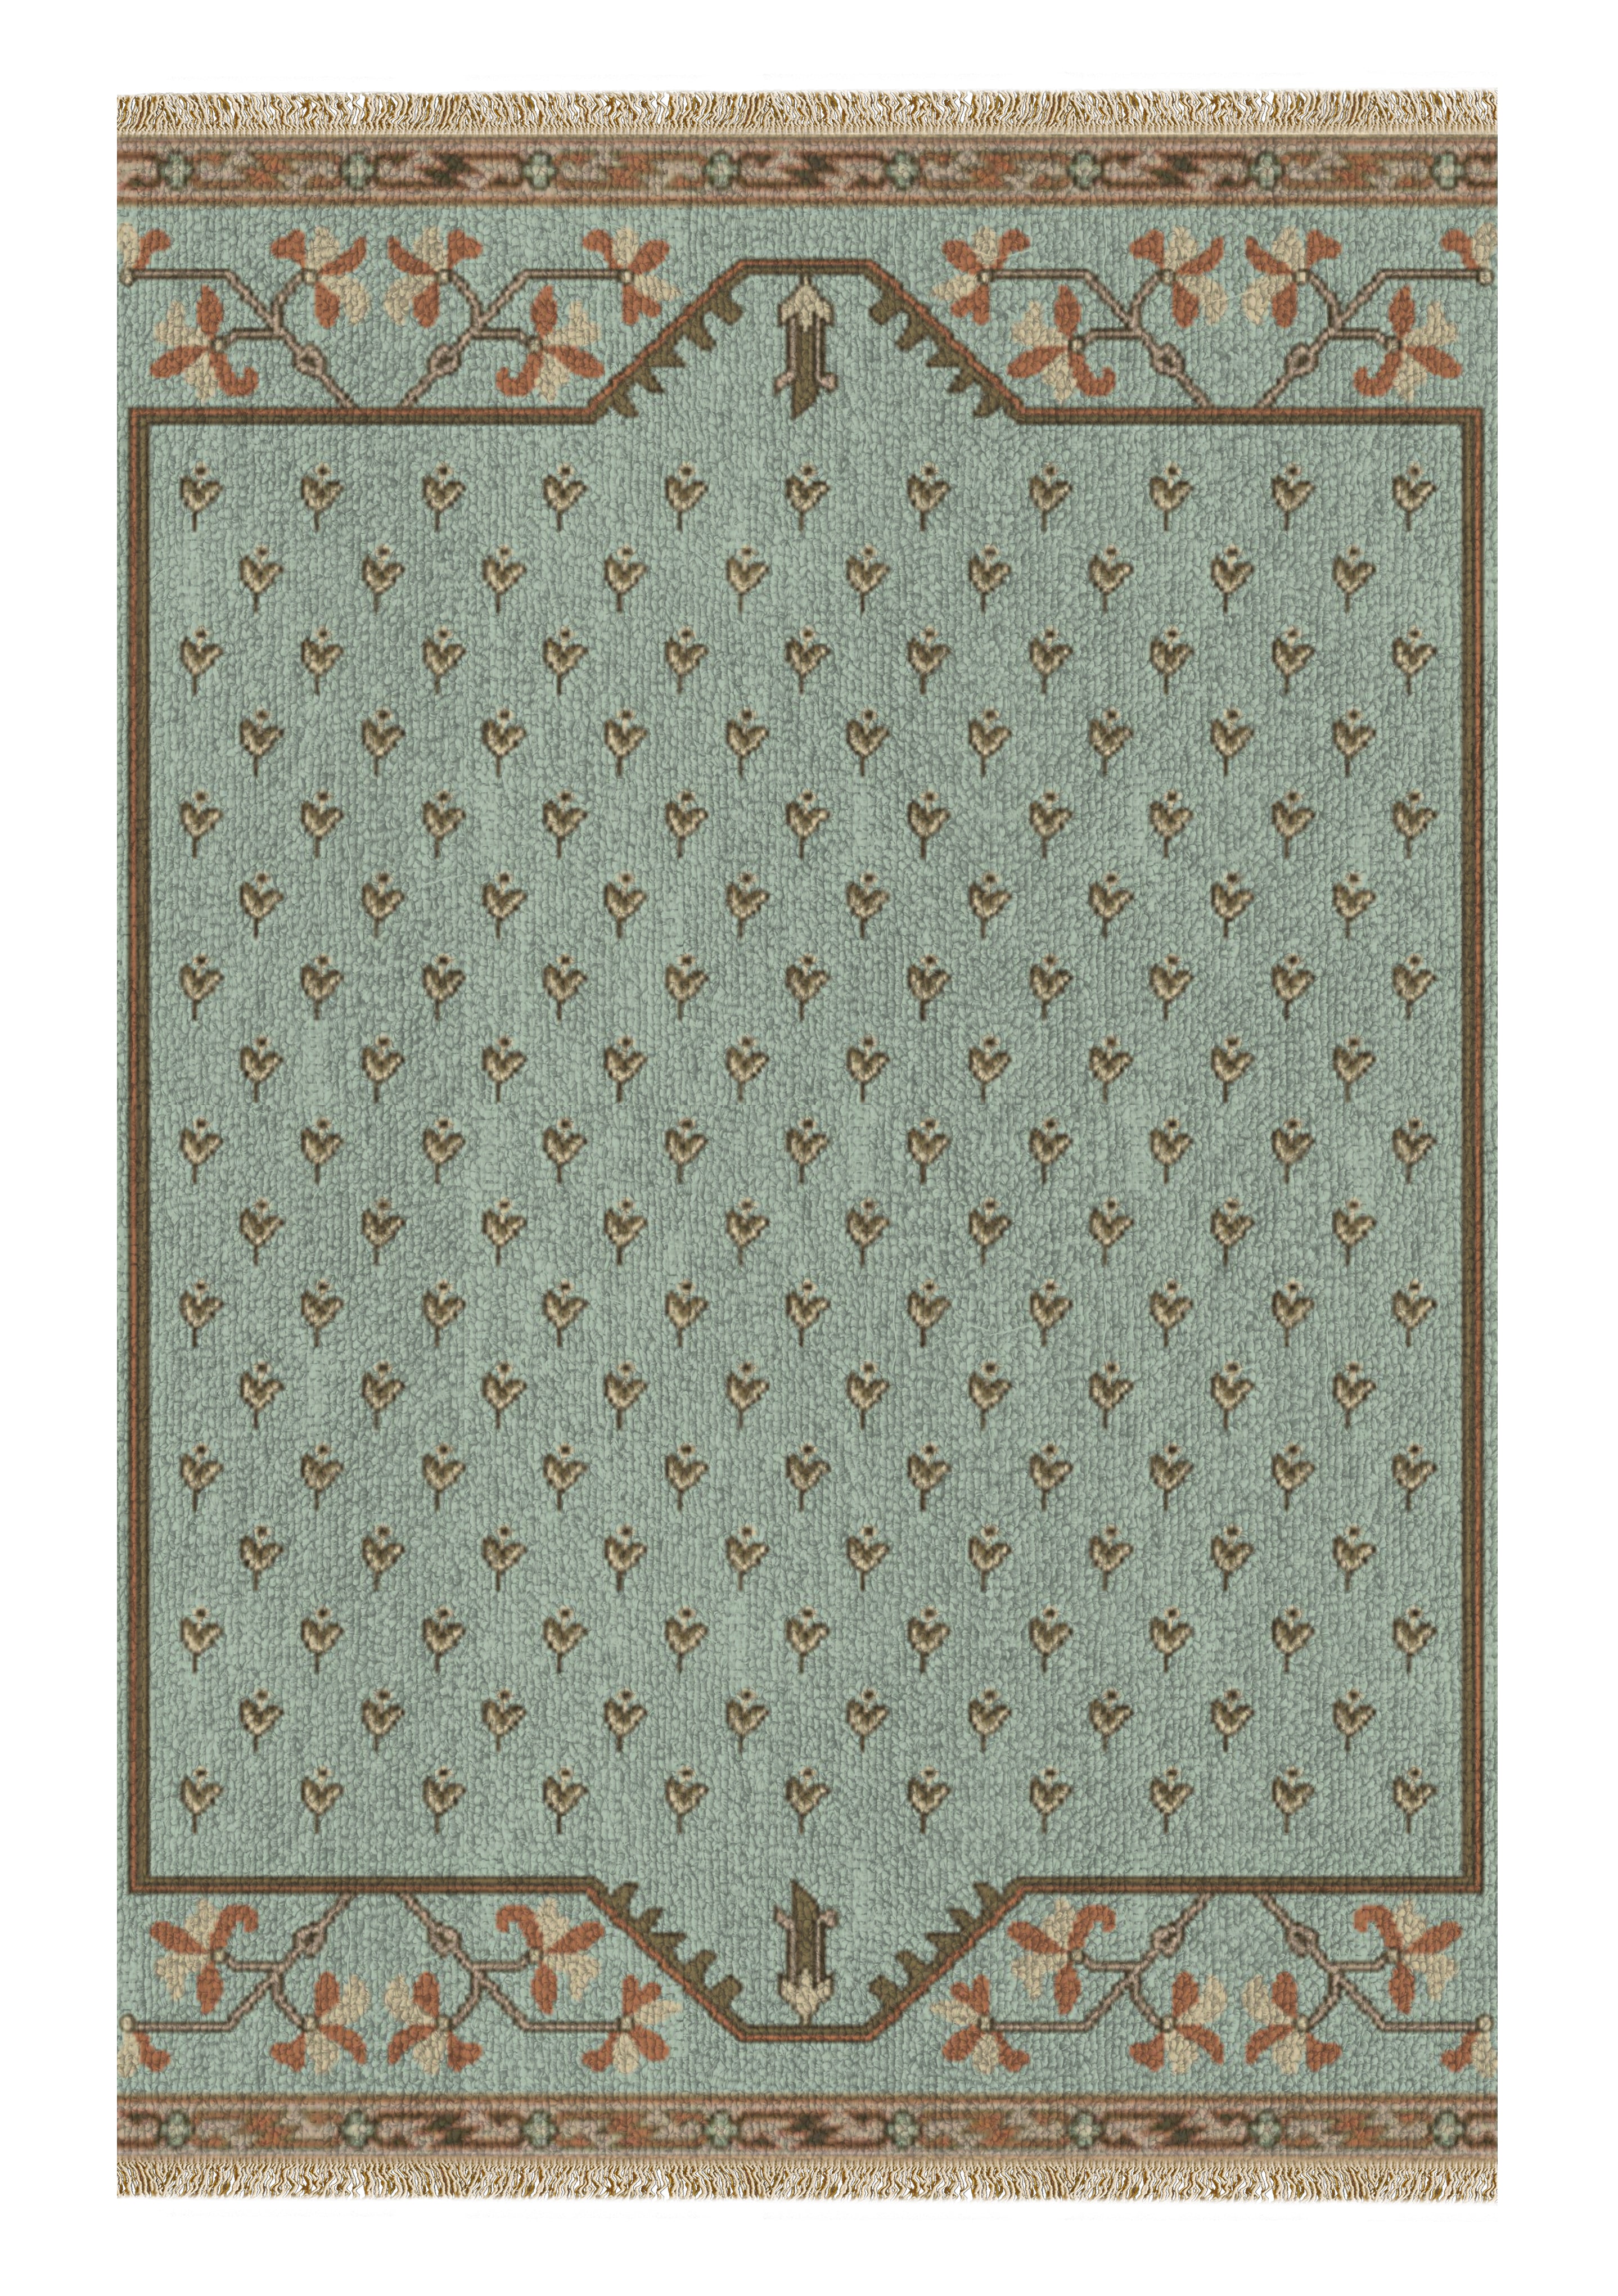 Lotto Hand-Knotted Wool Area Rug by Kevin Francis Design | Atlanta Interior Designer | Luxury Home Decor